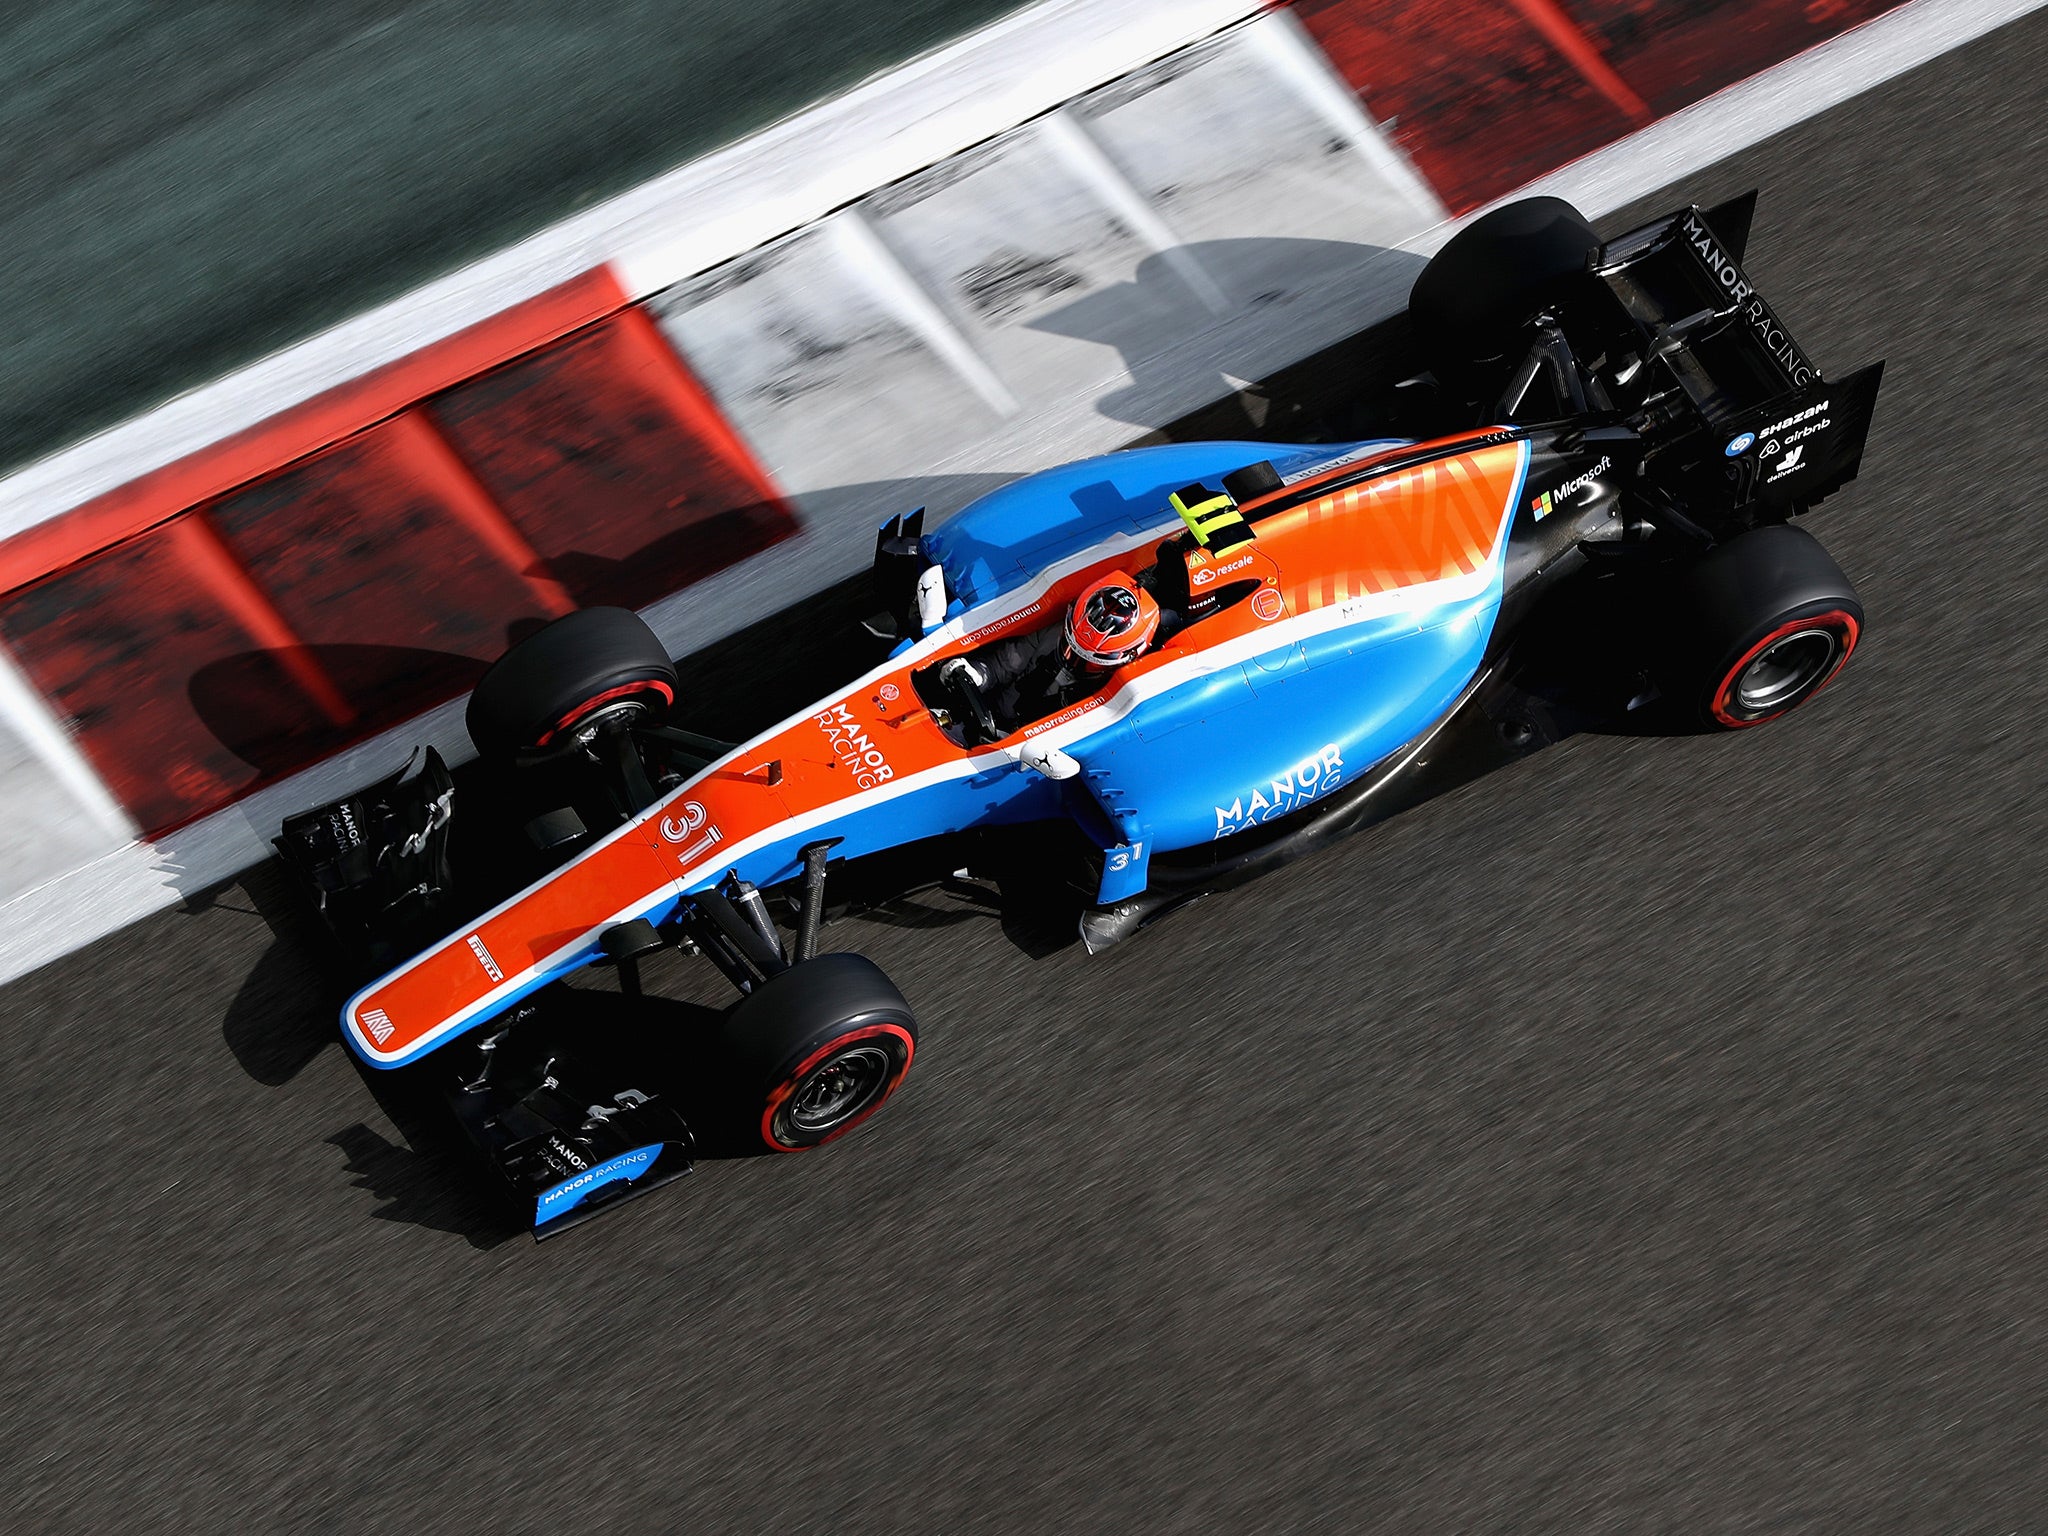 Manor have failed to find new investment ahead of the 2017 season